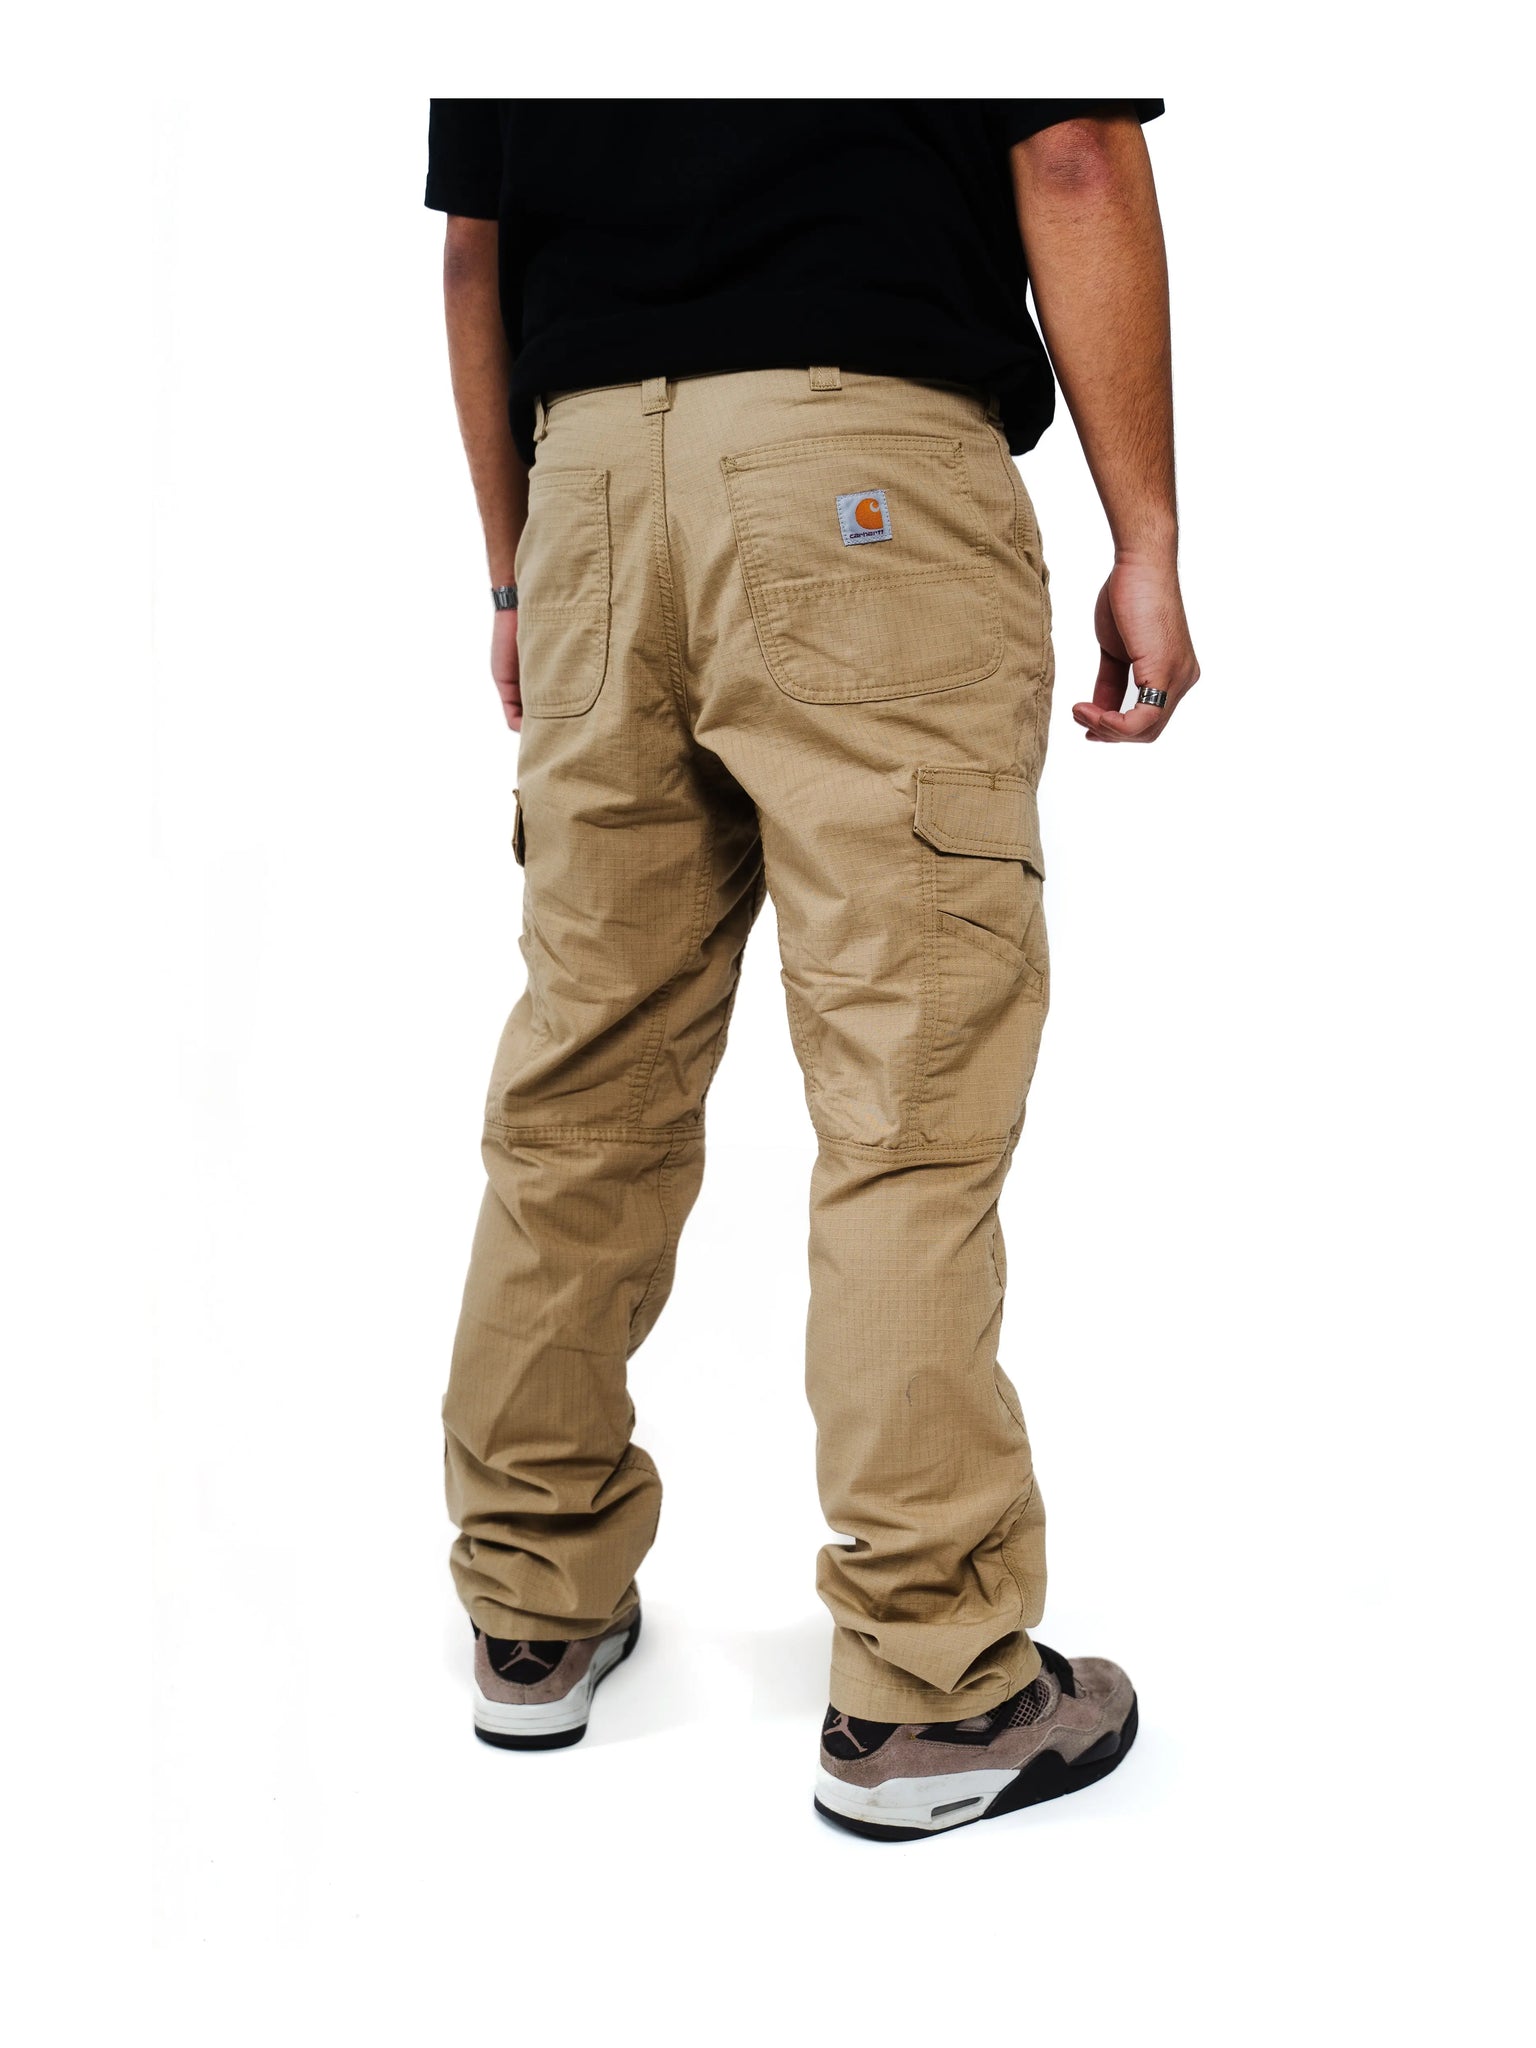 Carhartt Force Relaxed Fit Ripstop Cargo Work Pant Dark Khaki Prior